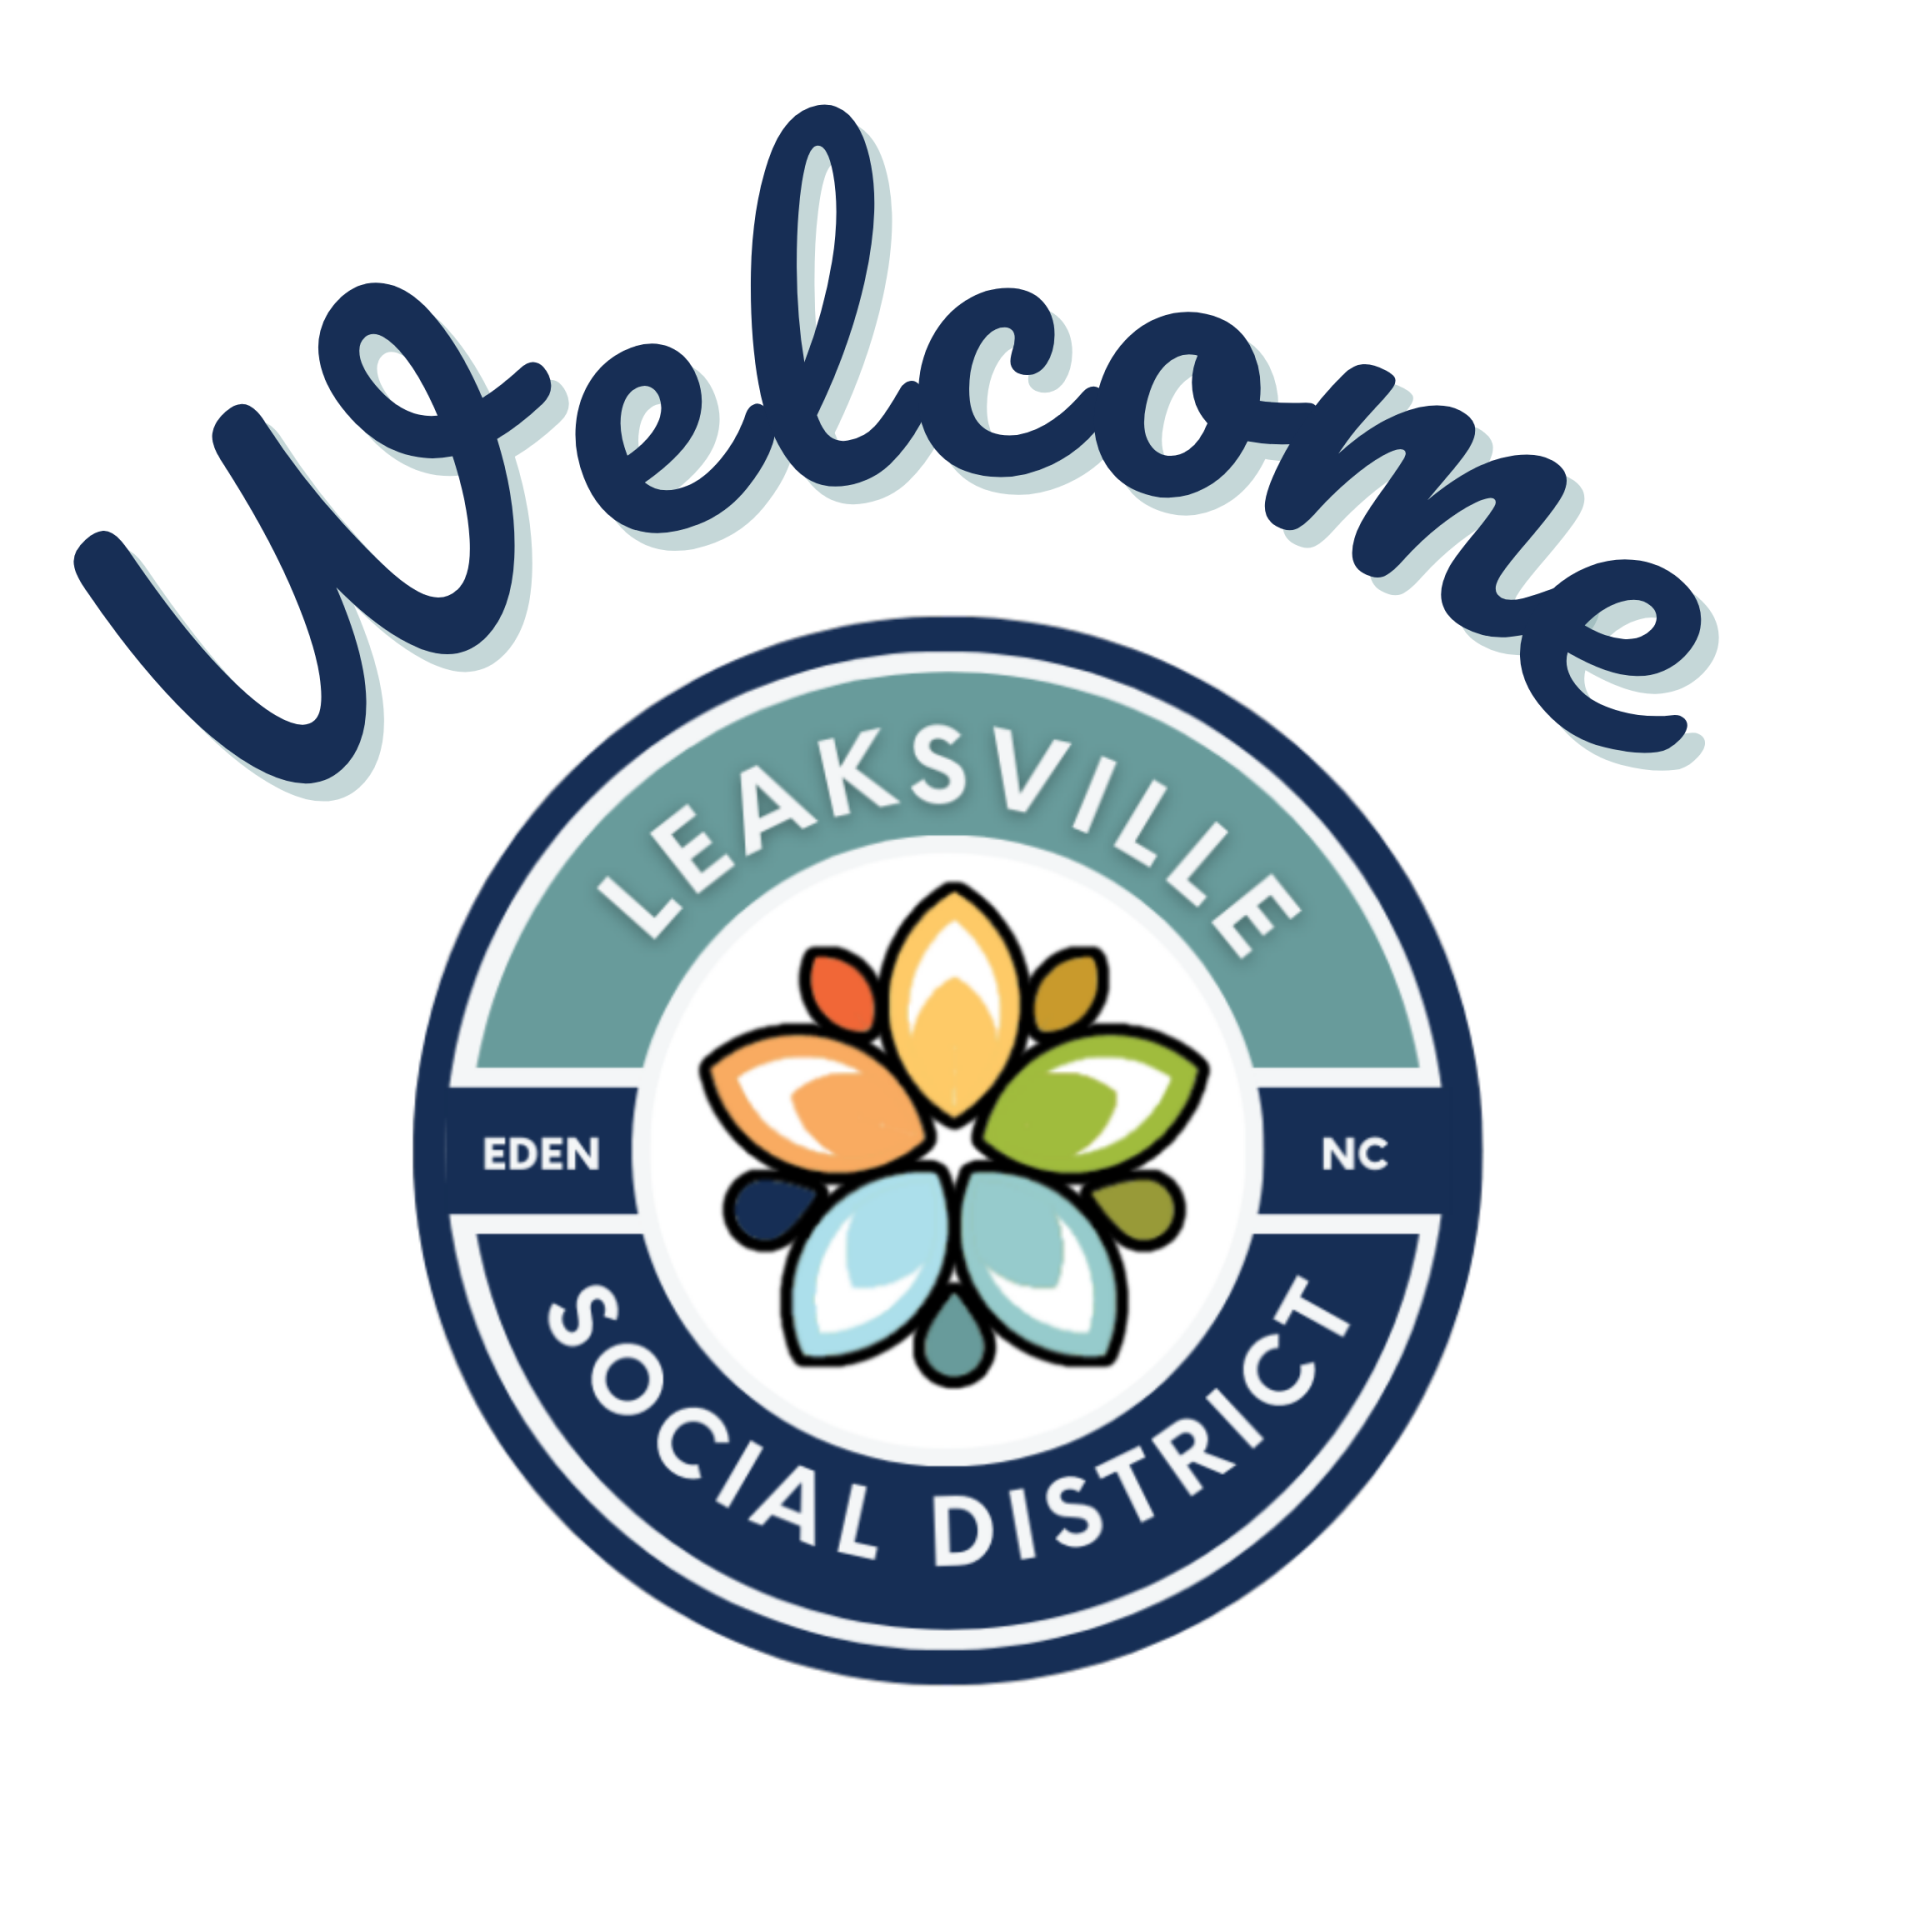 Leaksville Social District Sign - Welcome